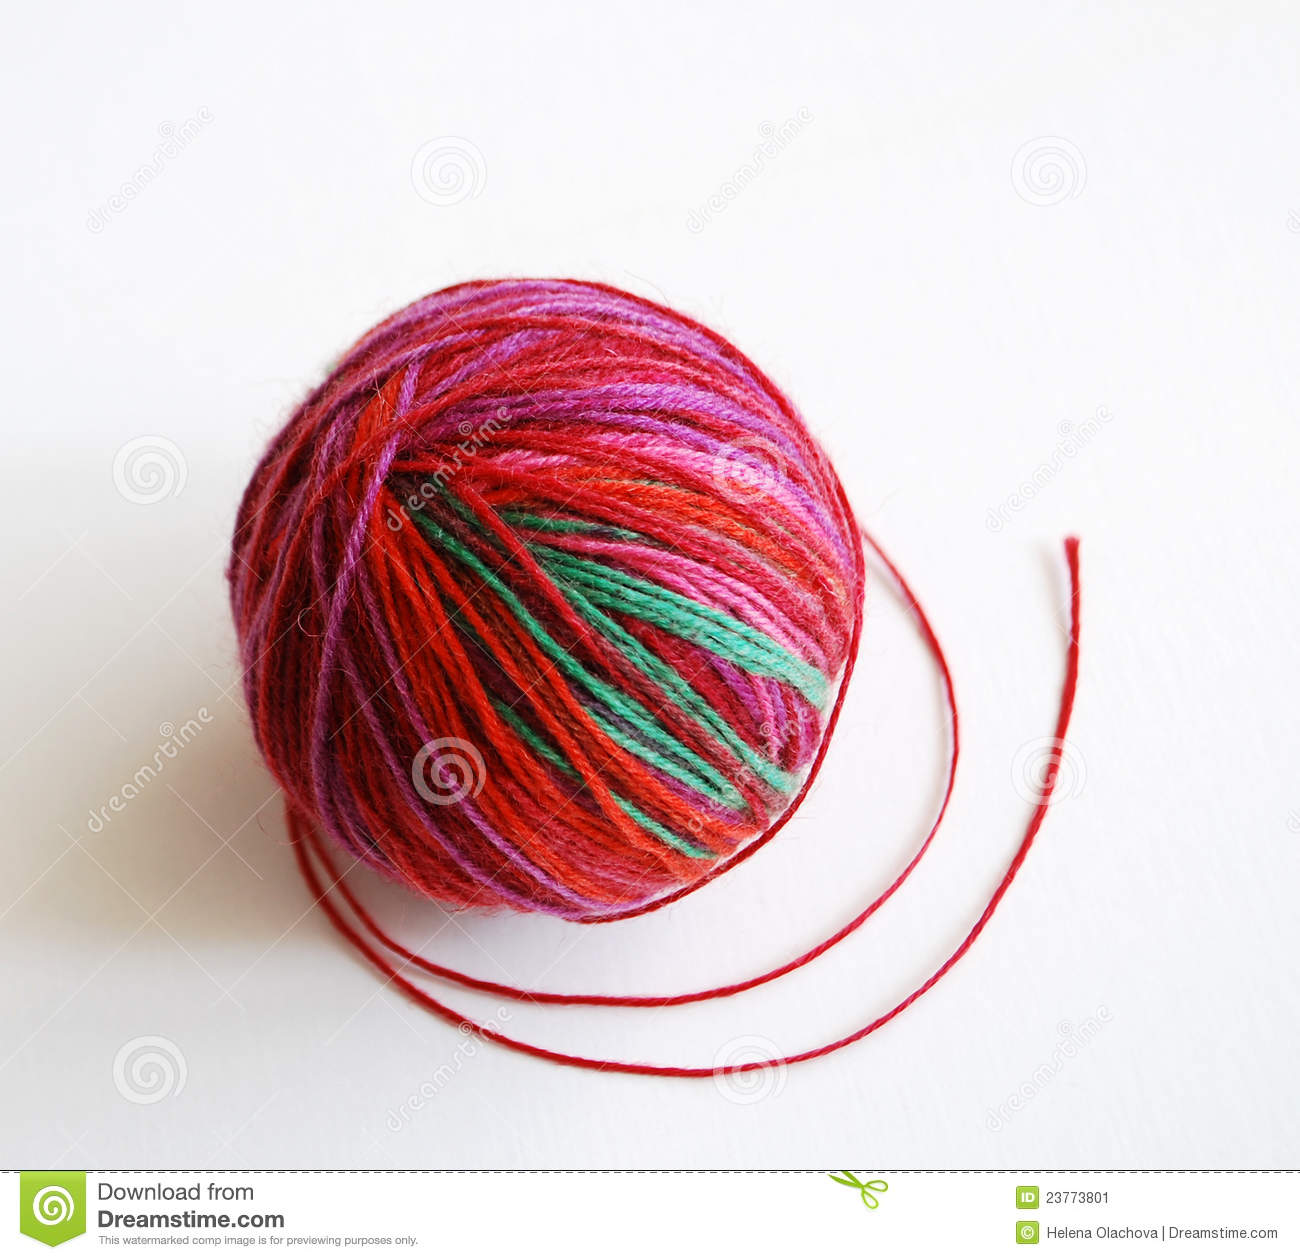 More Similar Stock Images Of   Red Yarn Ball